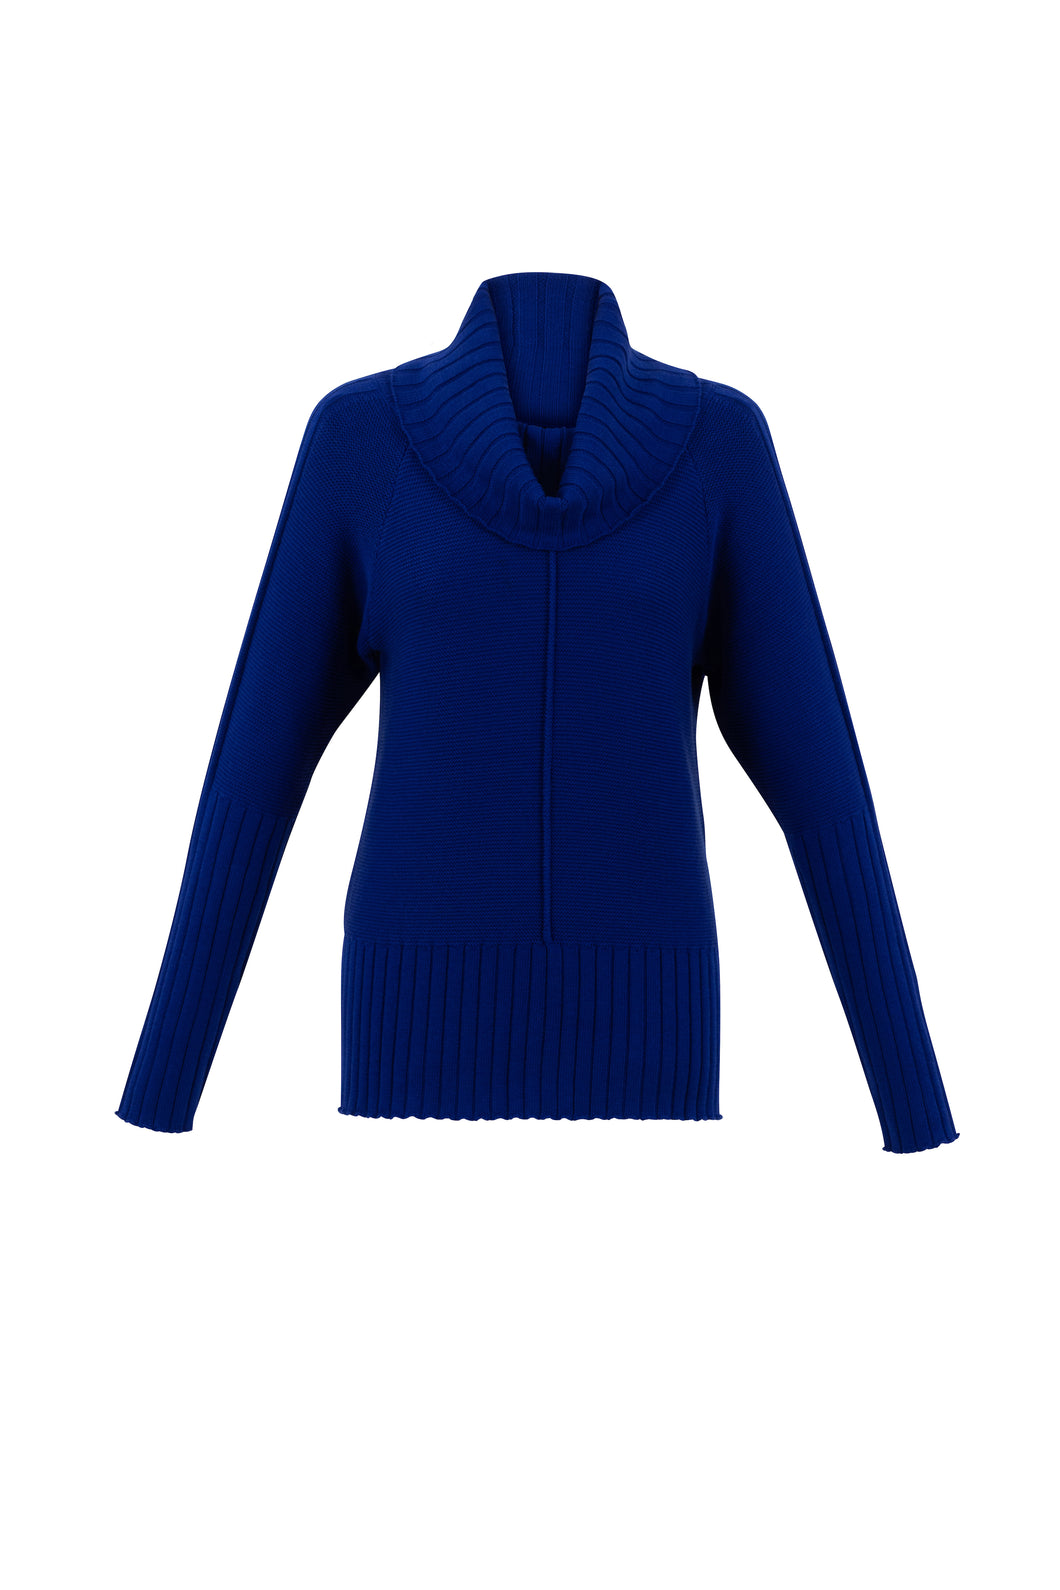 Marble Royal Blue Long Sleeve Cowl Neck Raised Knit Relaxed Fit Sweater